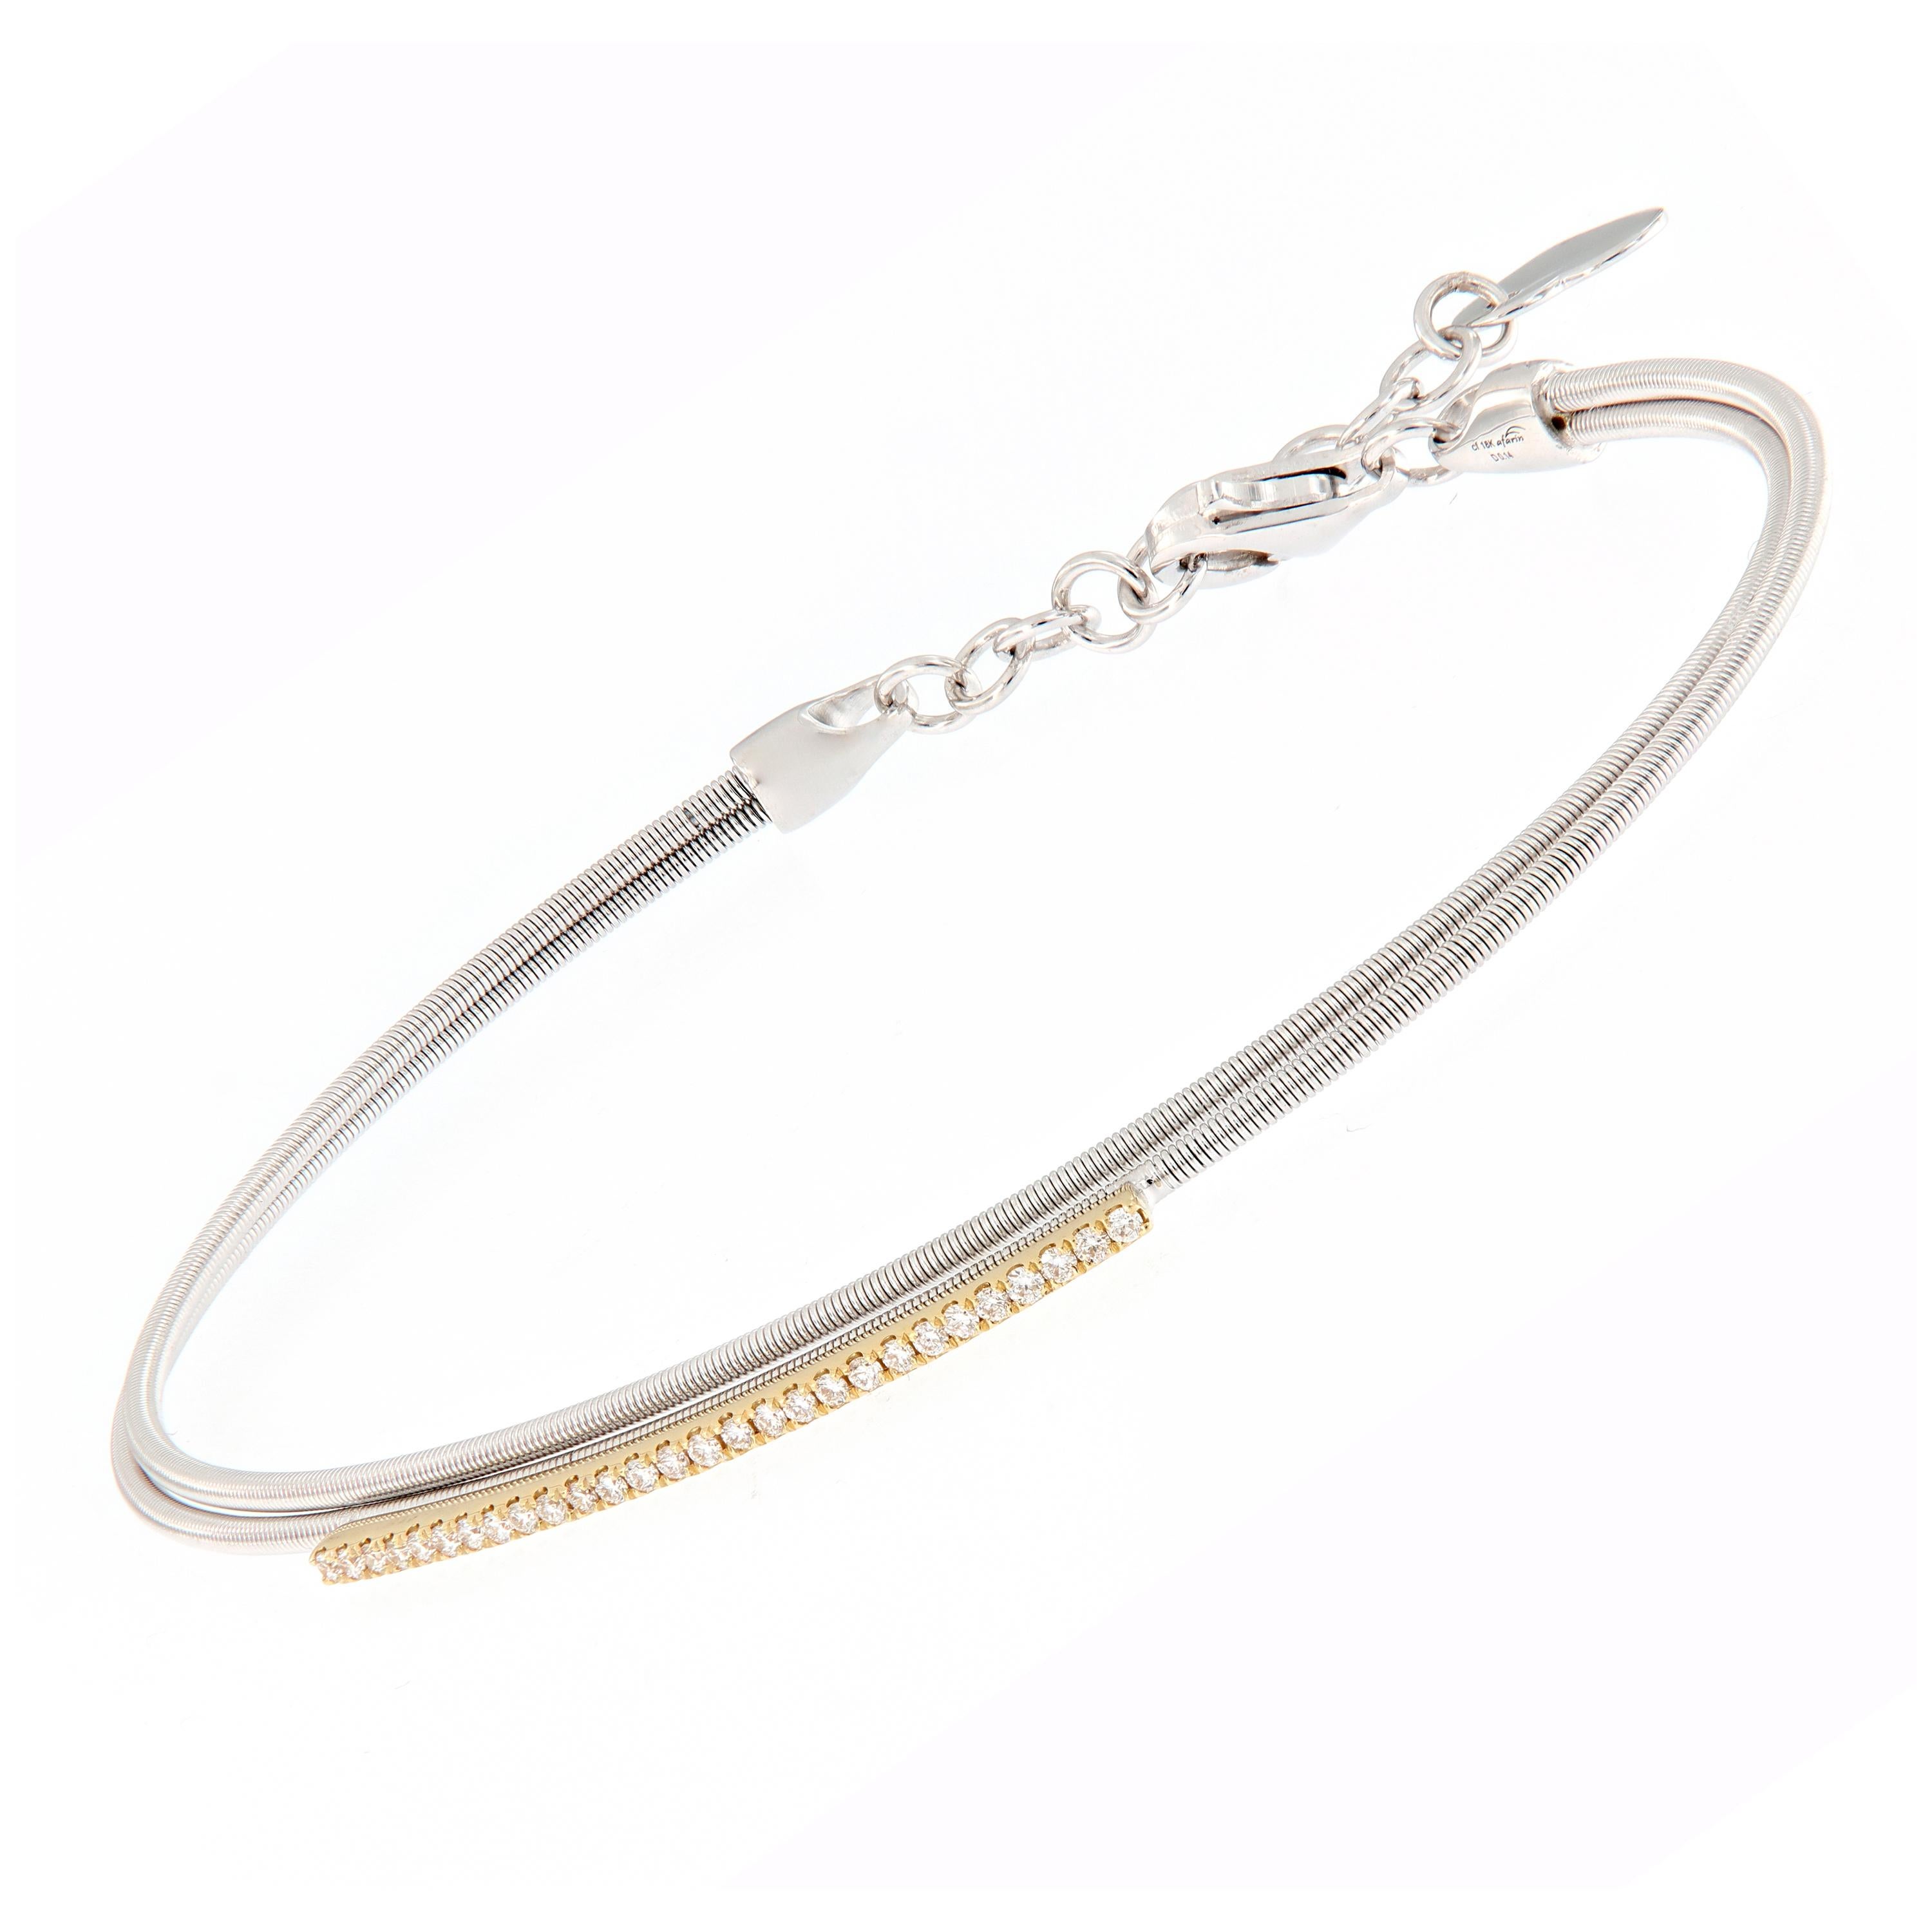 Wrap her wrist in the sparkle and comfort. This double wire bracelet is crafted in 18k white gold accented with a 18k yellow bar of diamonds. Bracelet secures with a safety chain clasp detailed with a heart dangle. 
18kWG & YG
Diamonds 0.14 cttw F-G